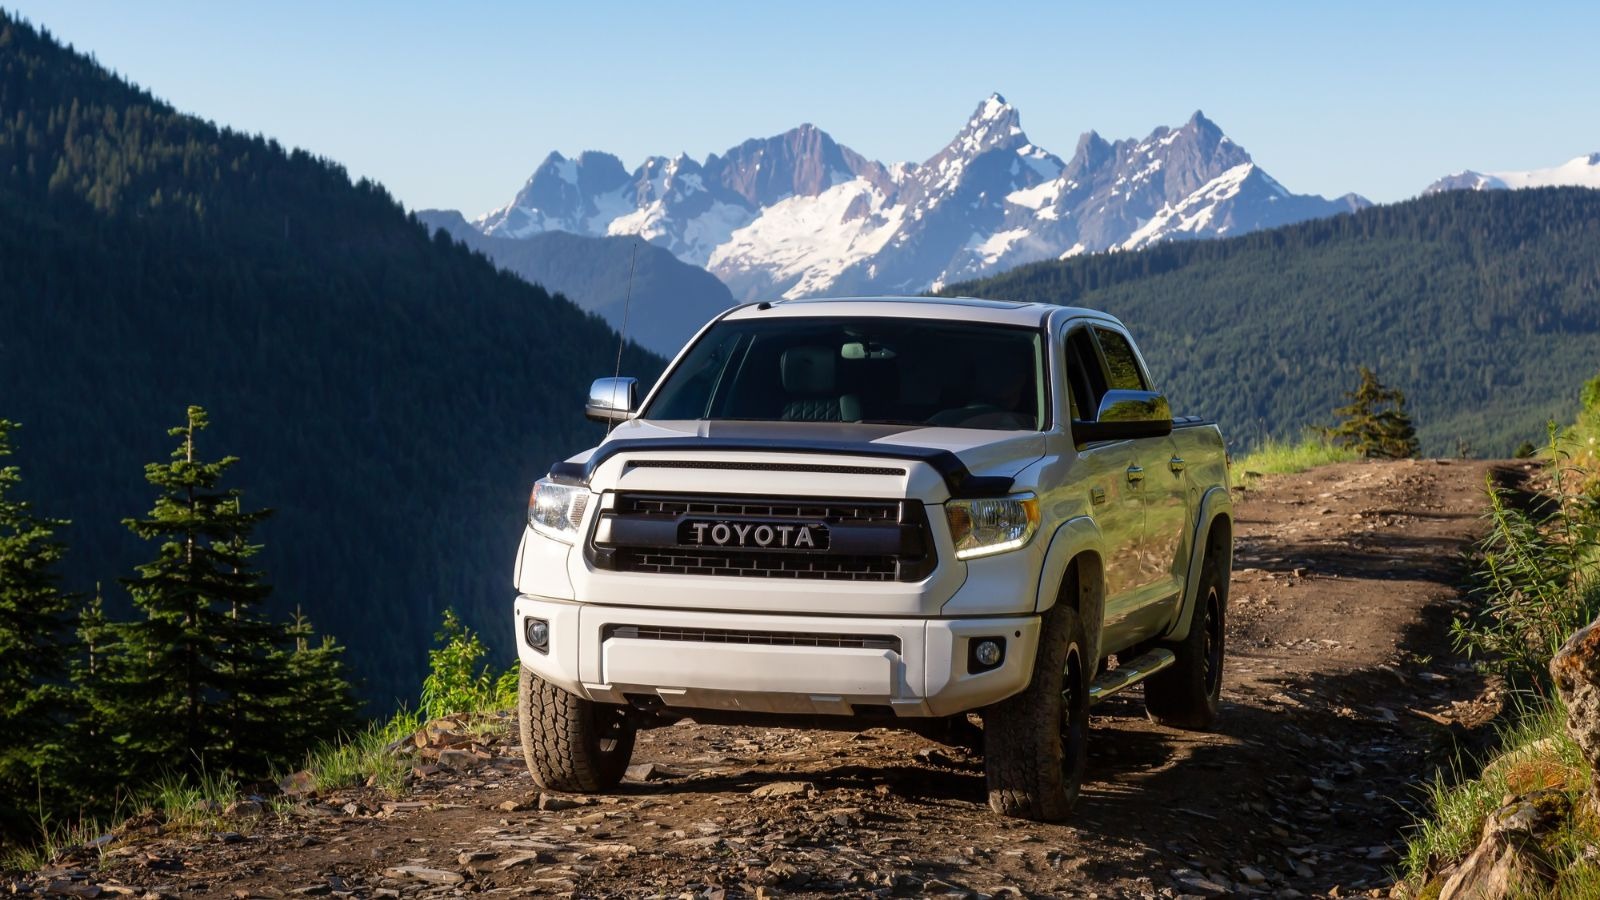 Best Tires for the Toyota Tacoma - Car Talk